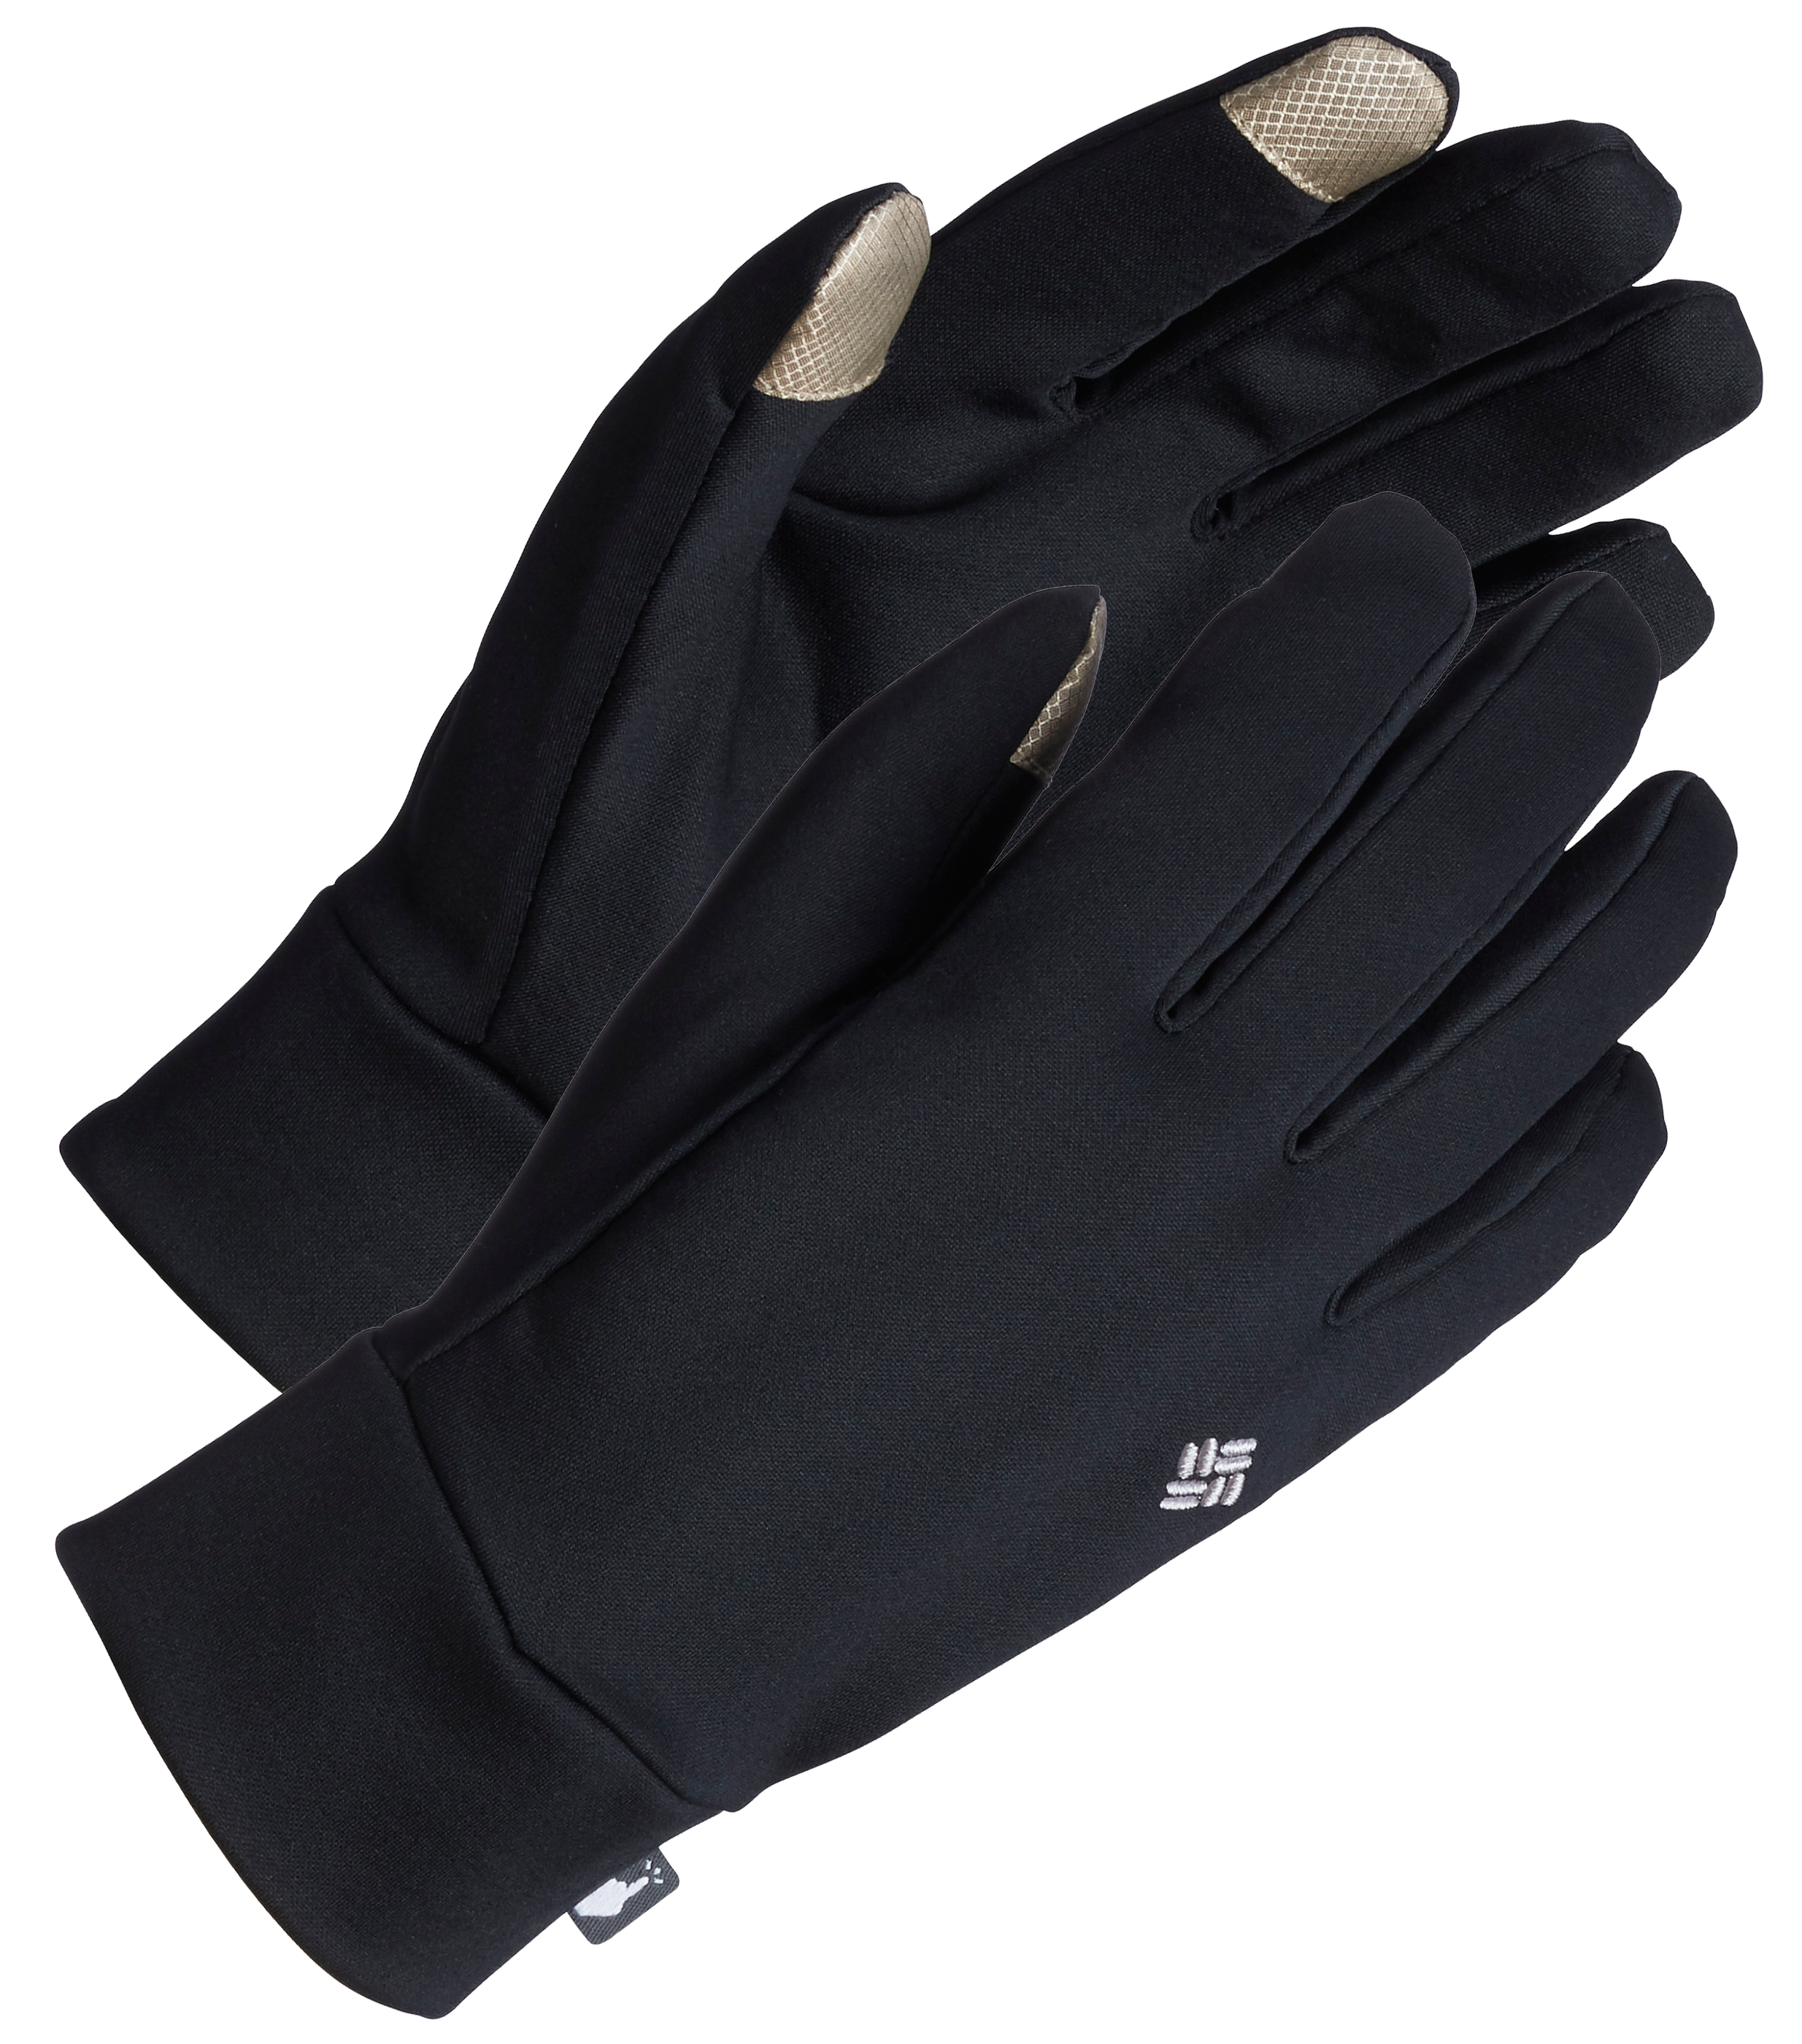 Columbia Omni-Heat Touch Glove Liners